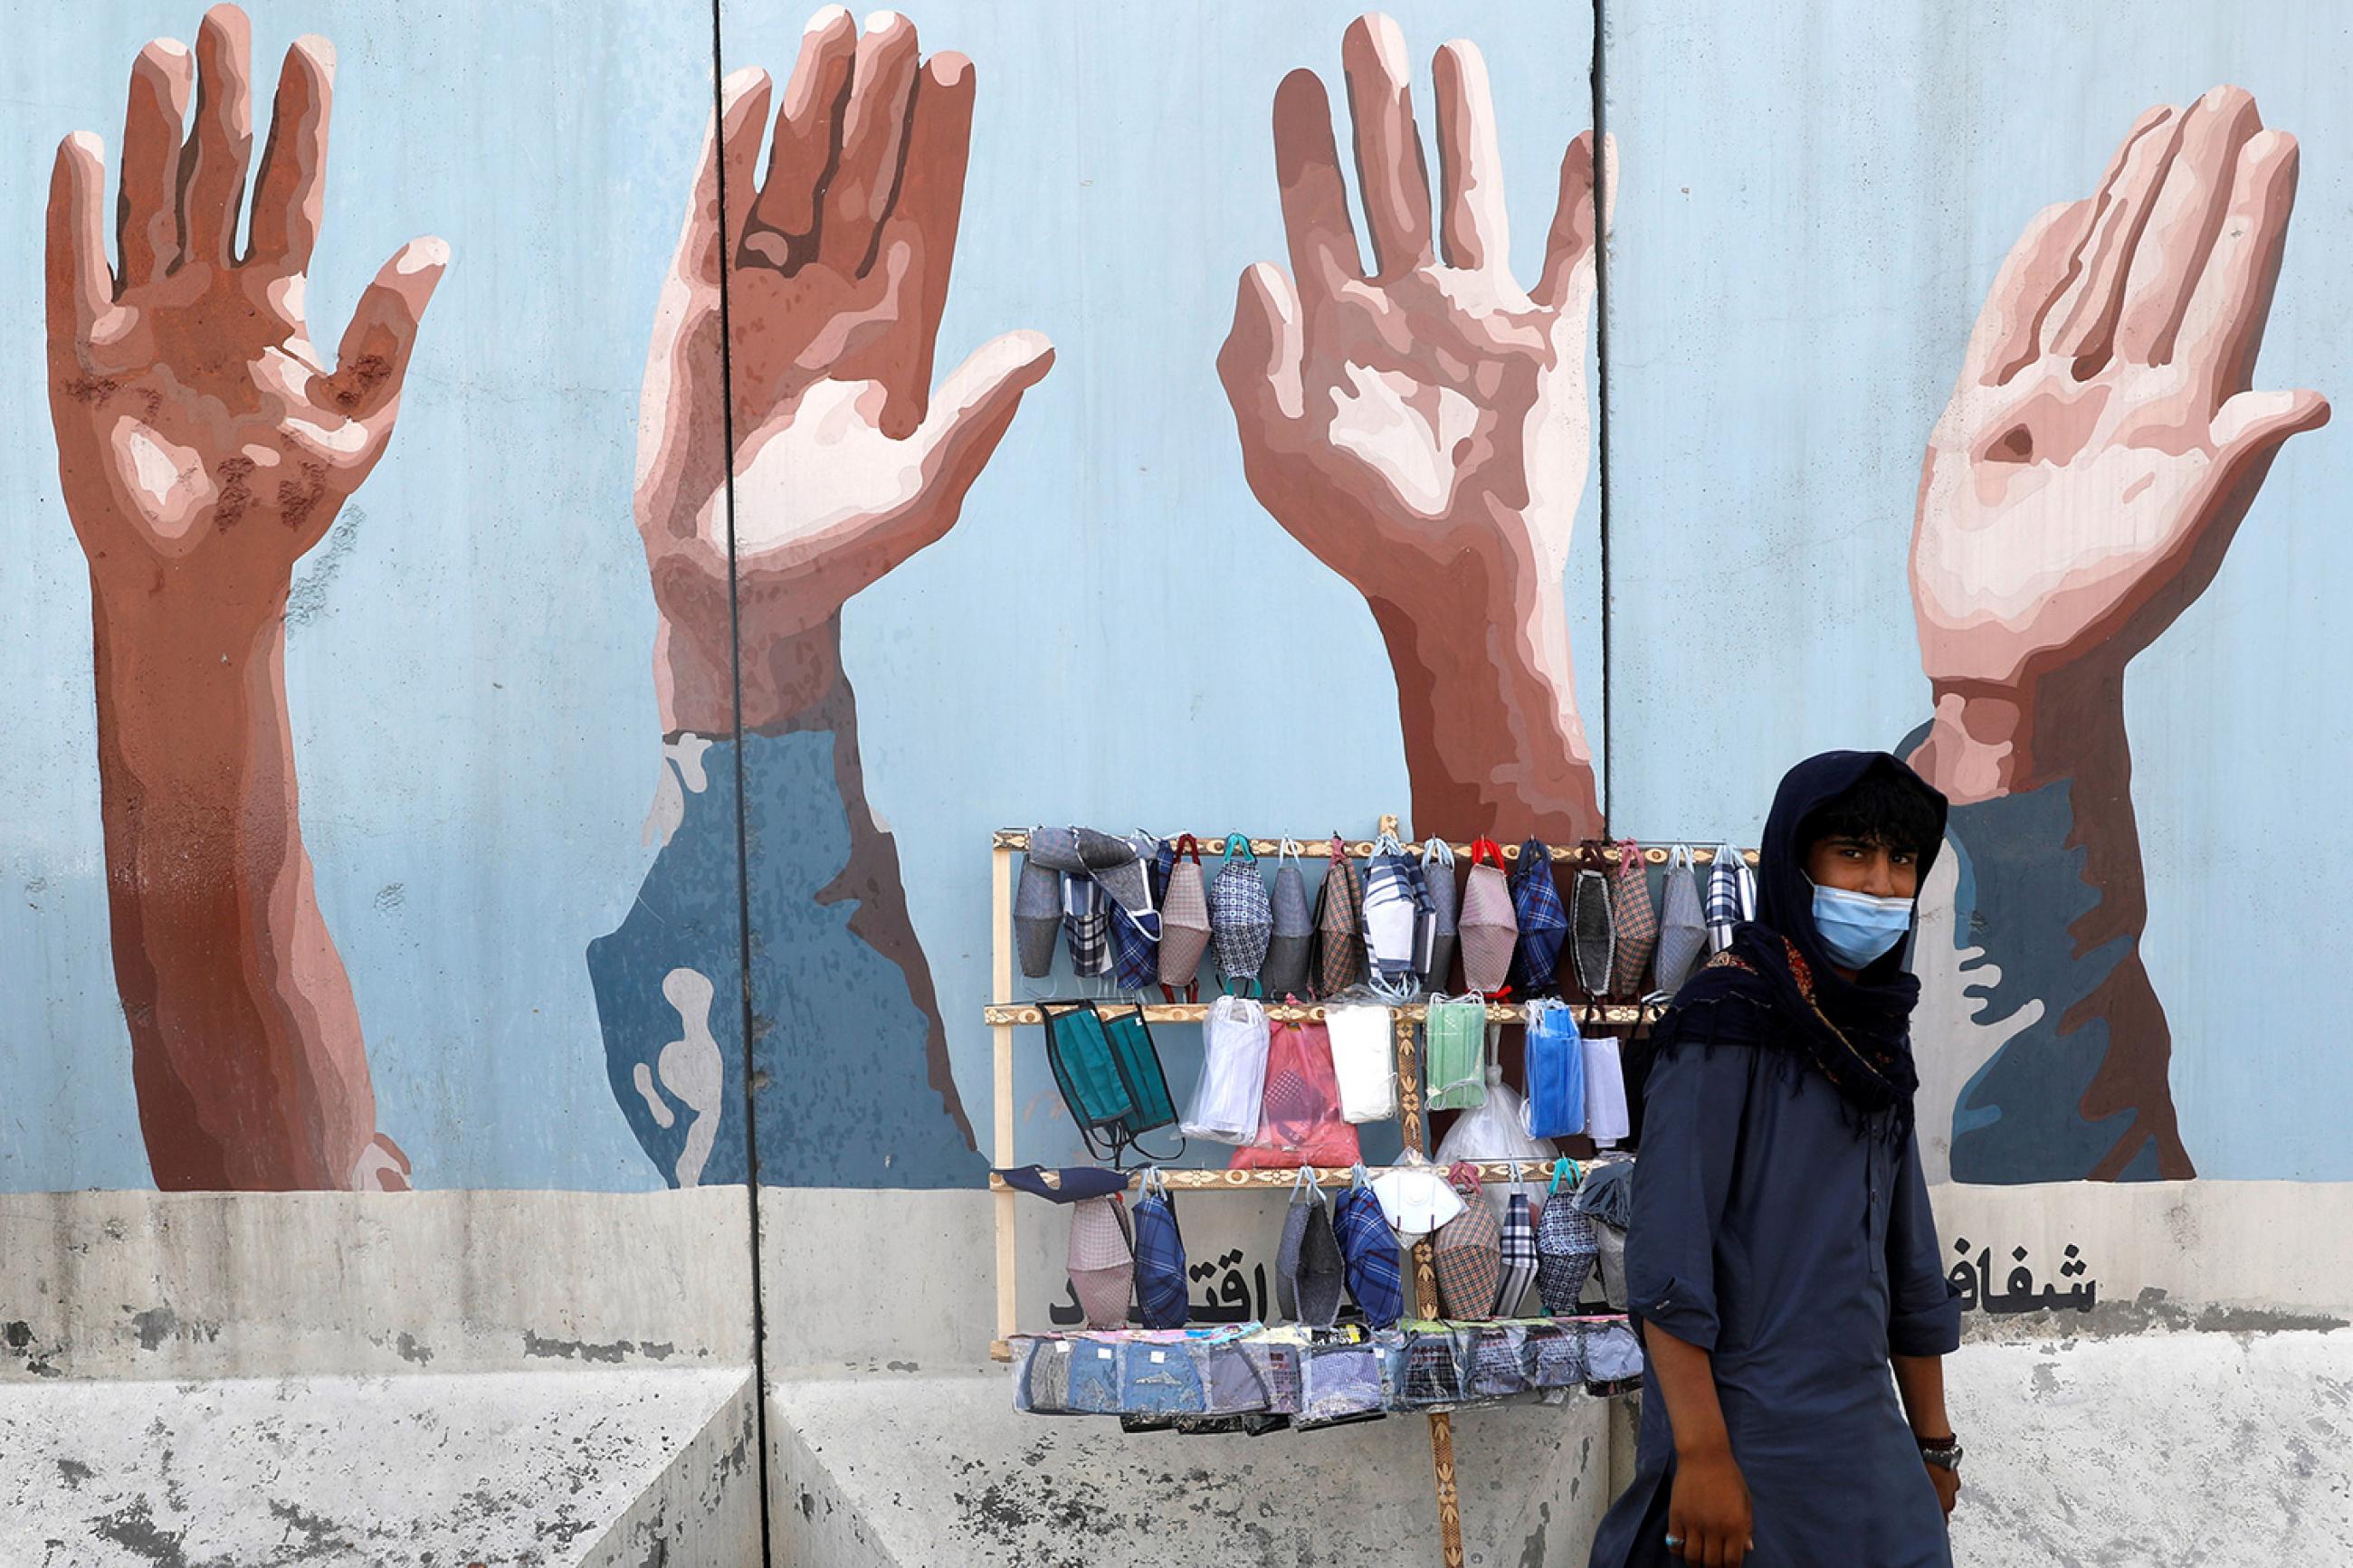 An Afghan man sells protective face masks during the coronavirus disease (COVID-19) outbreak in Kabul, Afghanistan June 18, 2020. The photo shows a man in front of a small cart with masks on display. in the background is a mural of hands raised. REUTERS/Mohammad Ismail